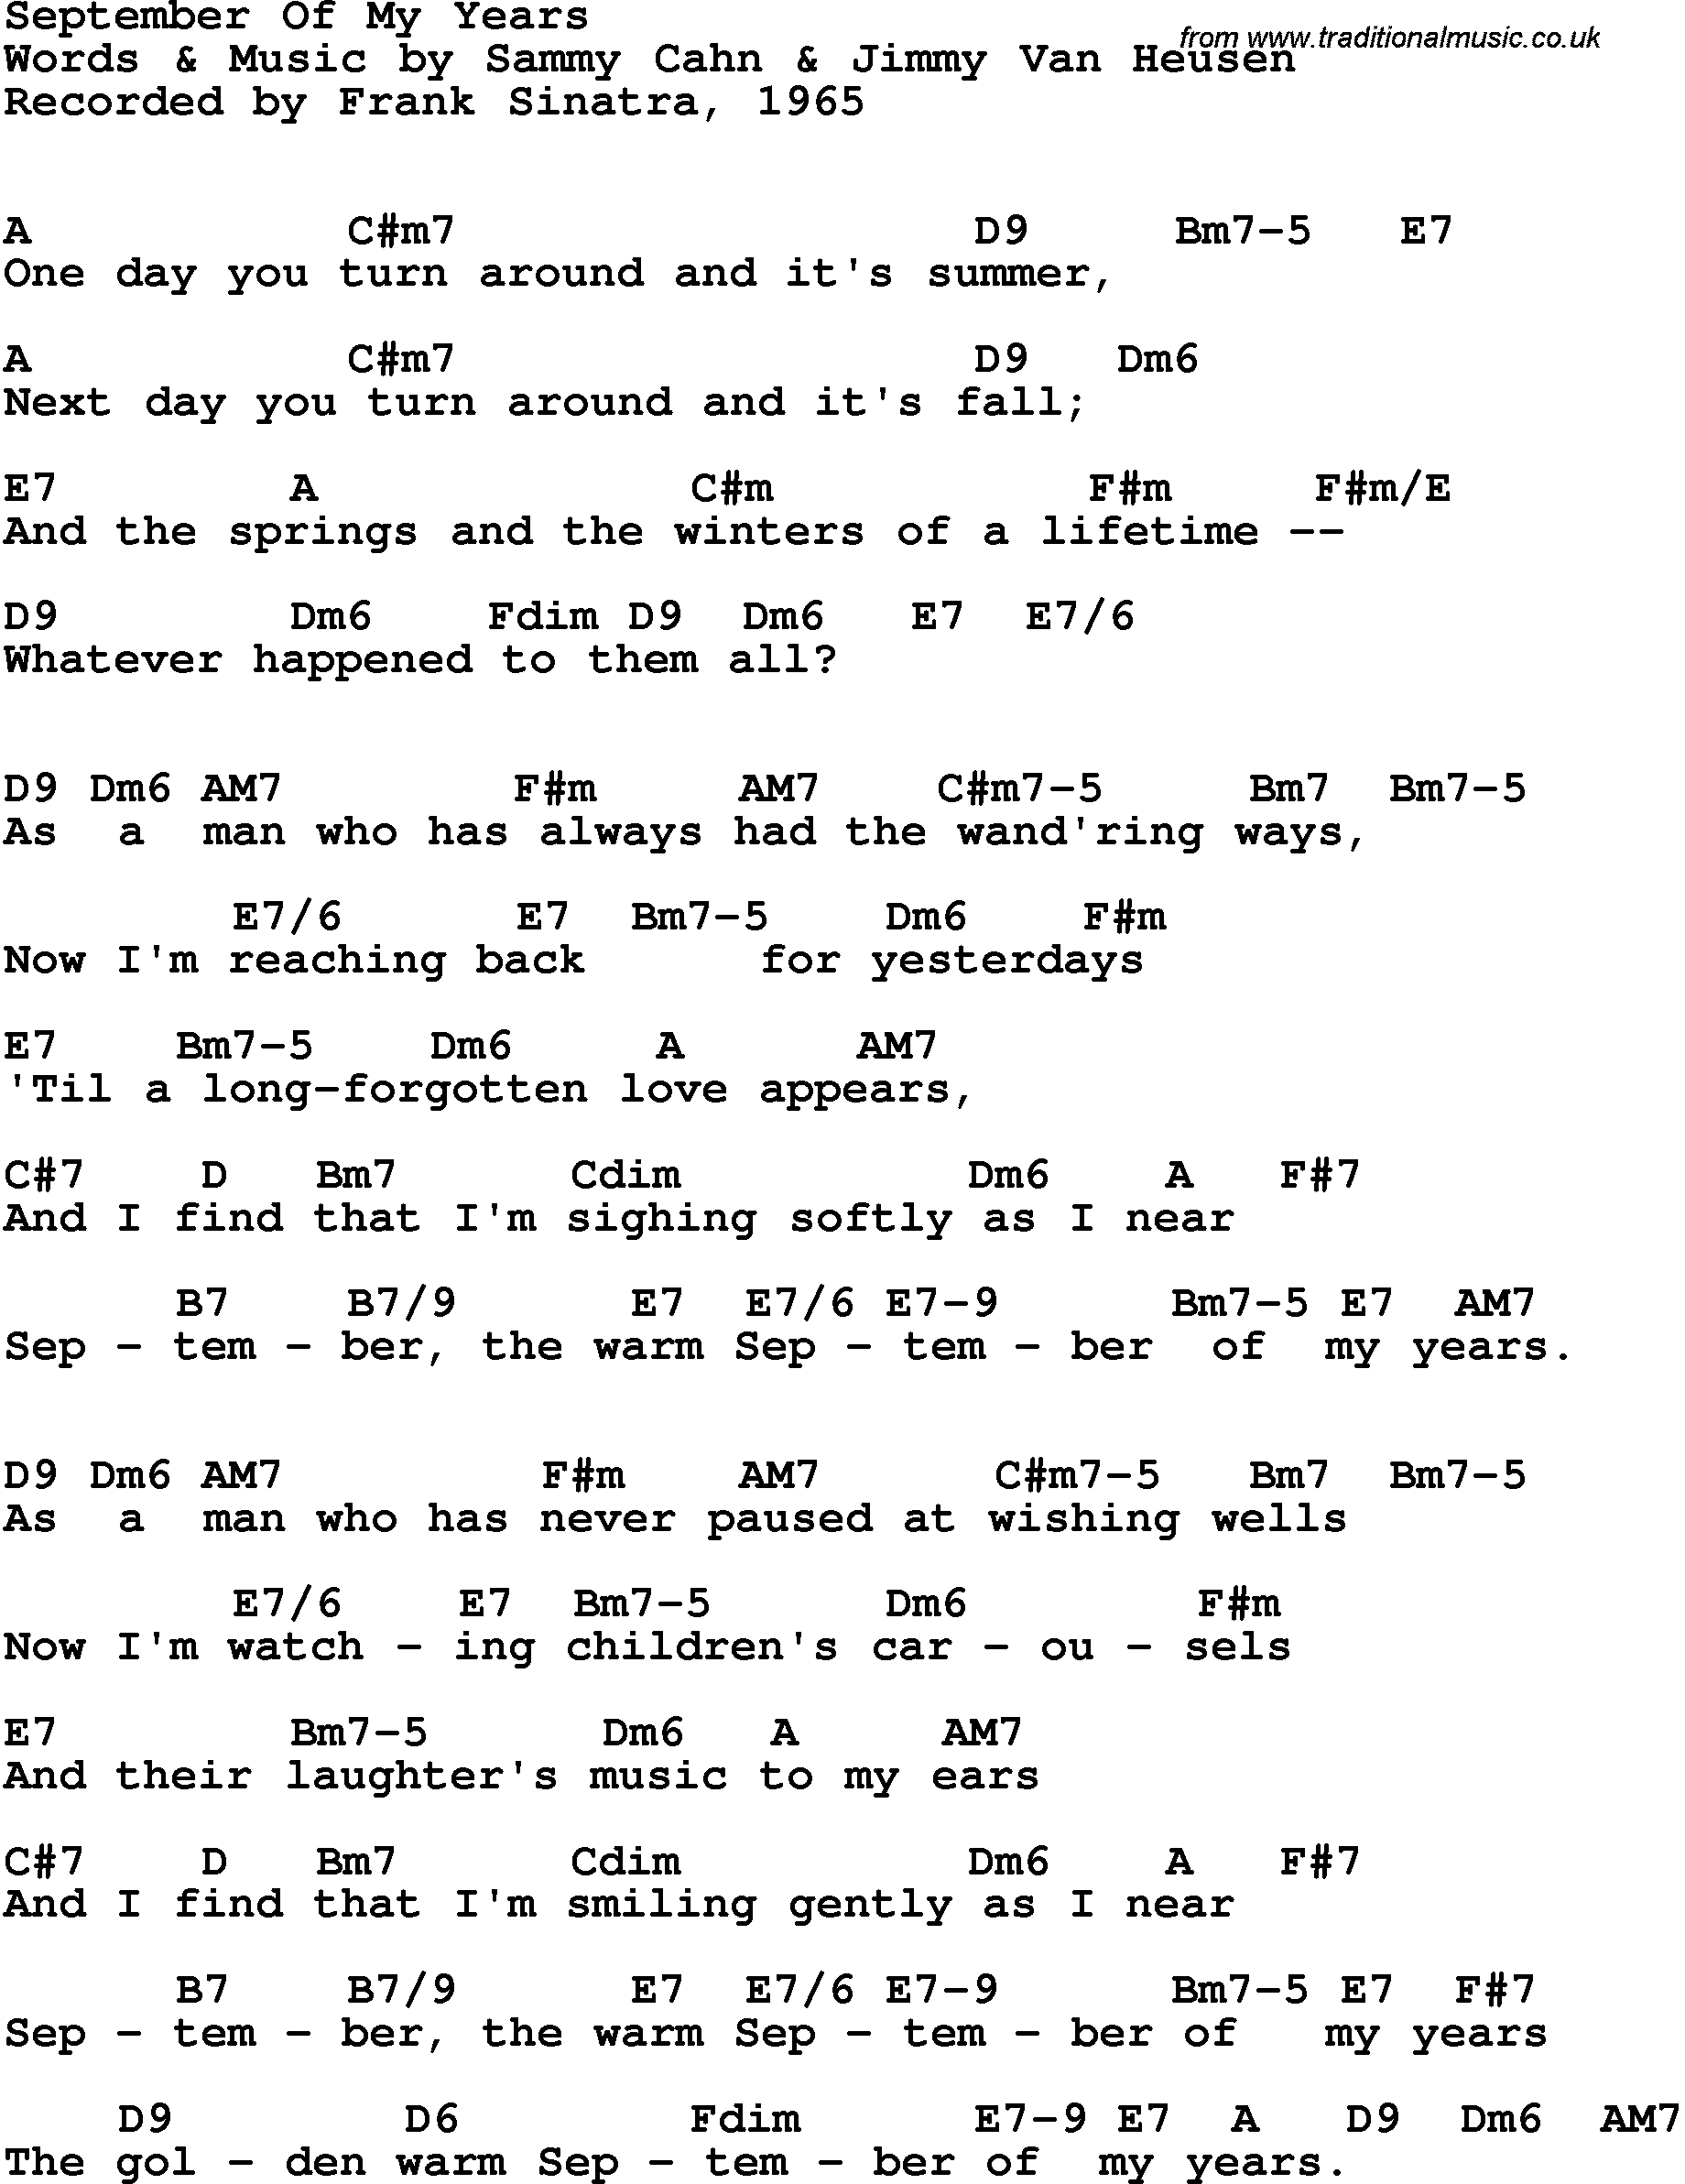 Song Lyrics with guitar chords for September Of My Years - Frank Sinatra, 1965